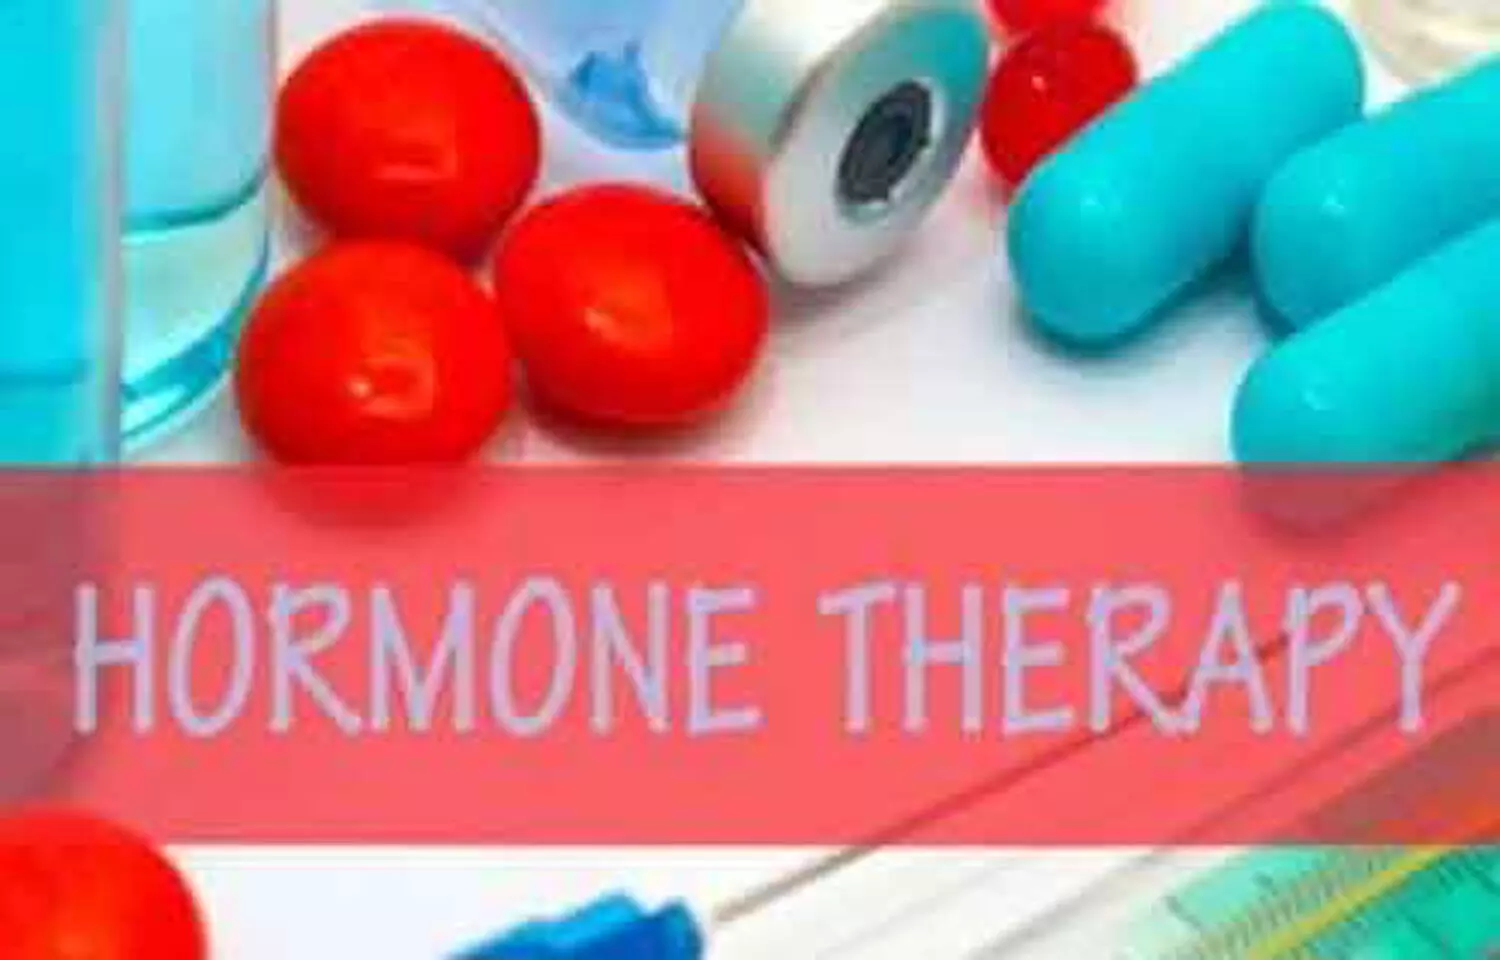 Hormone replacement therapy   does not increase risk of developing dementia: BMJ